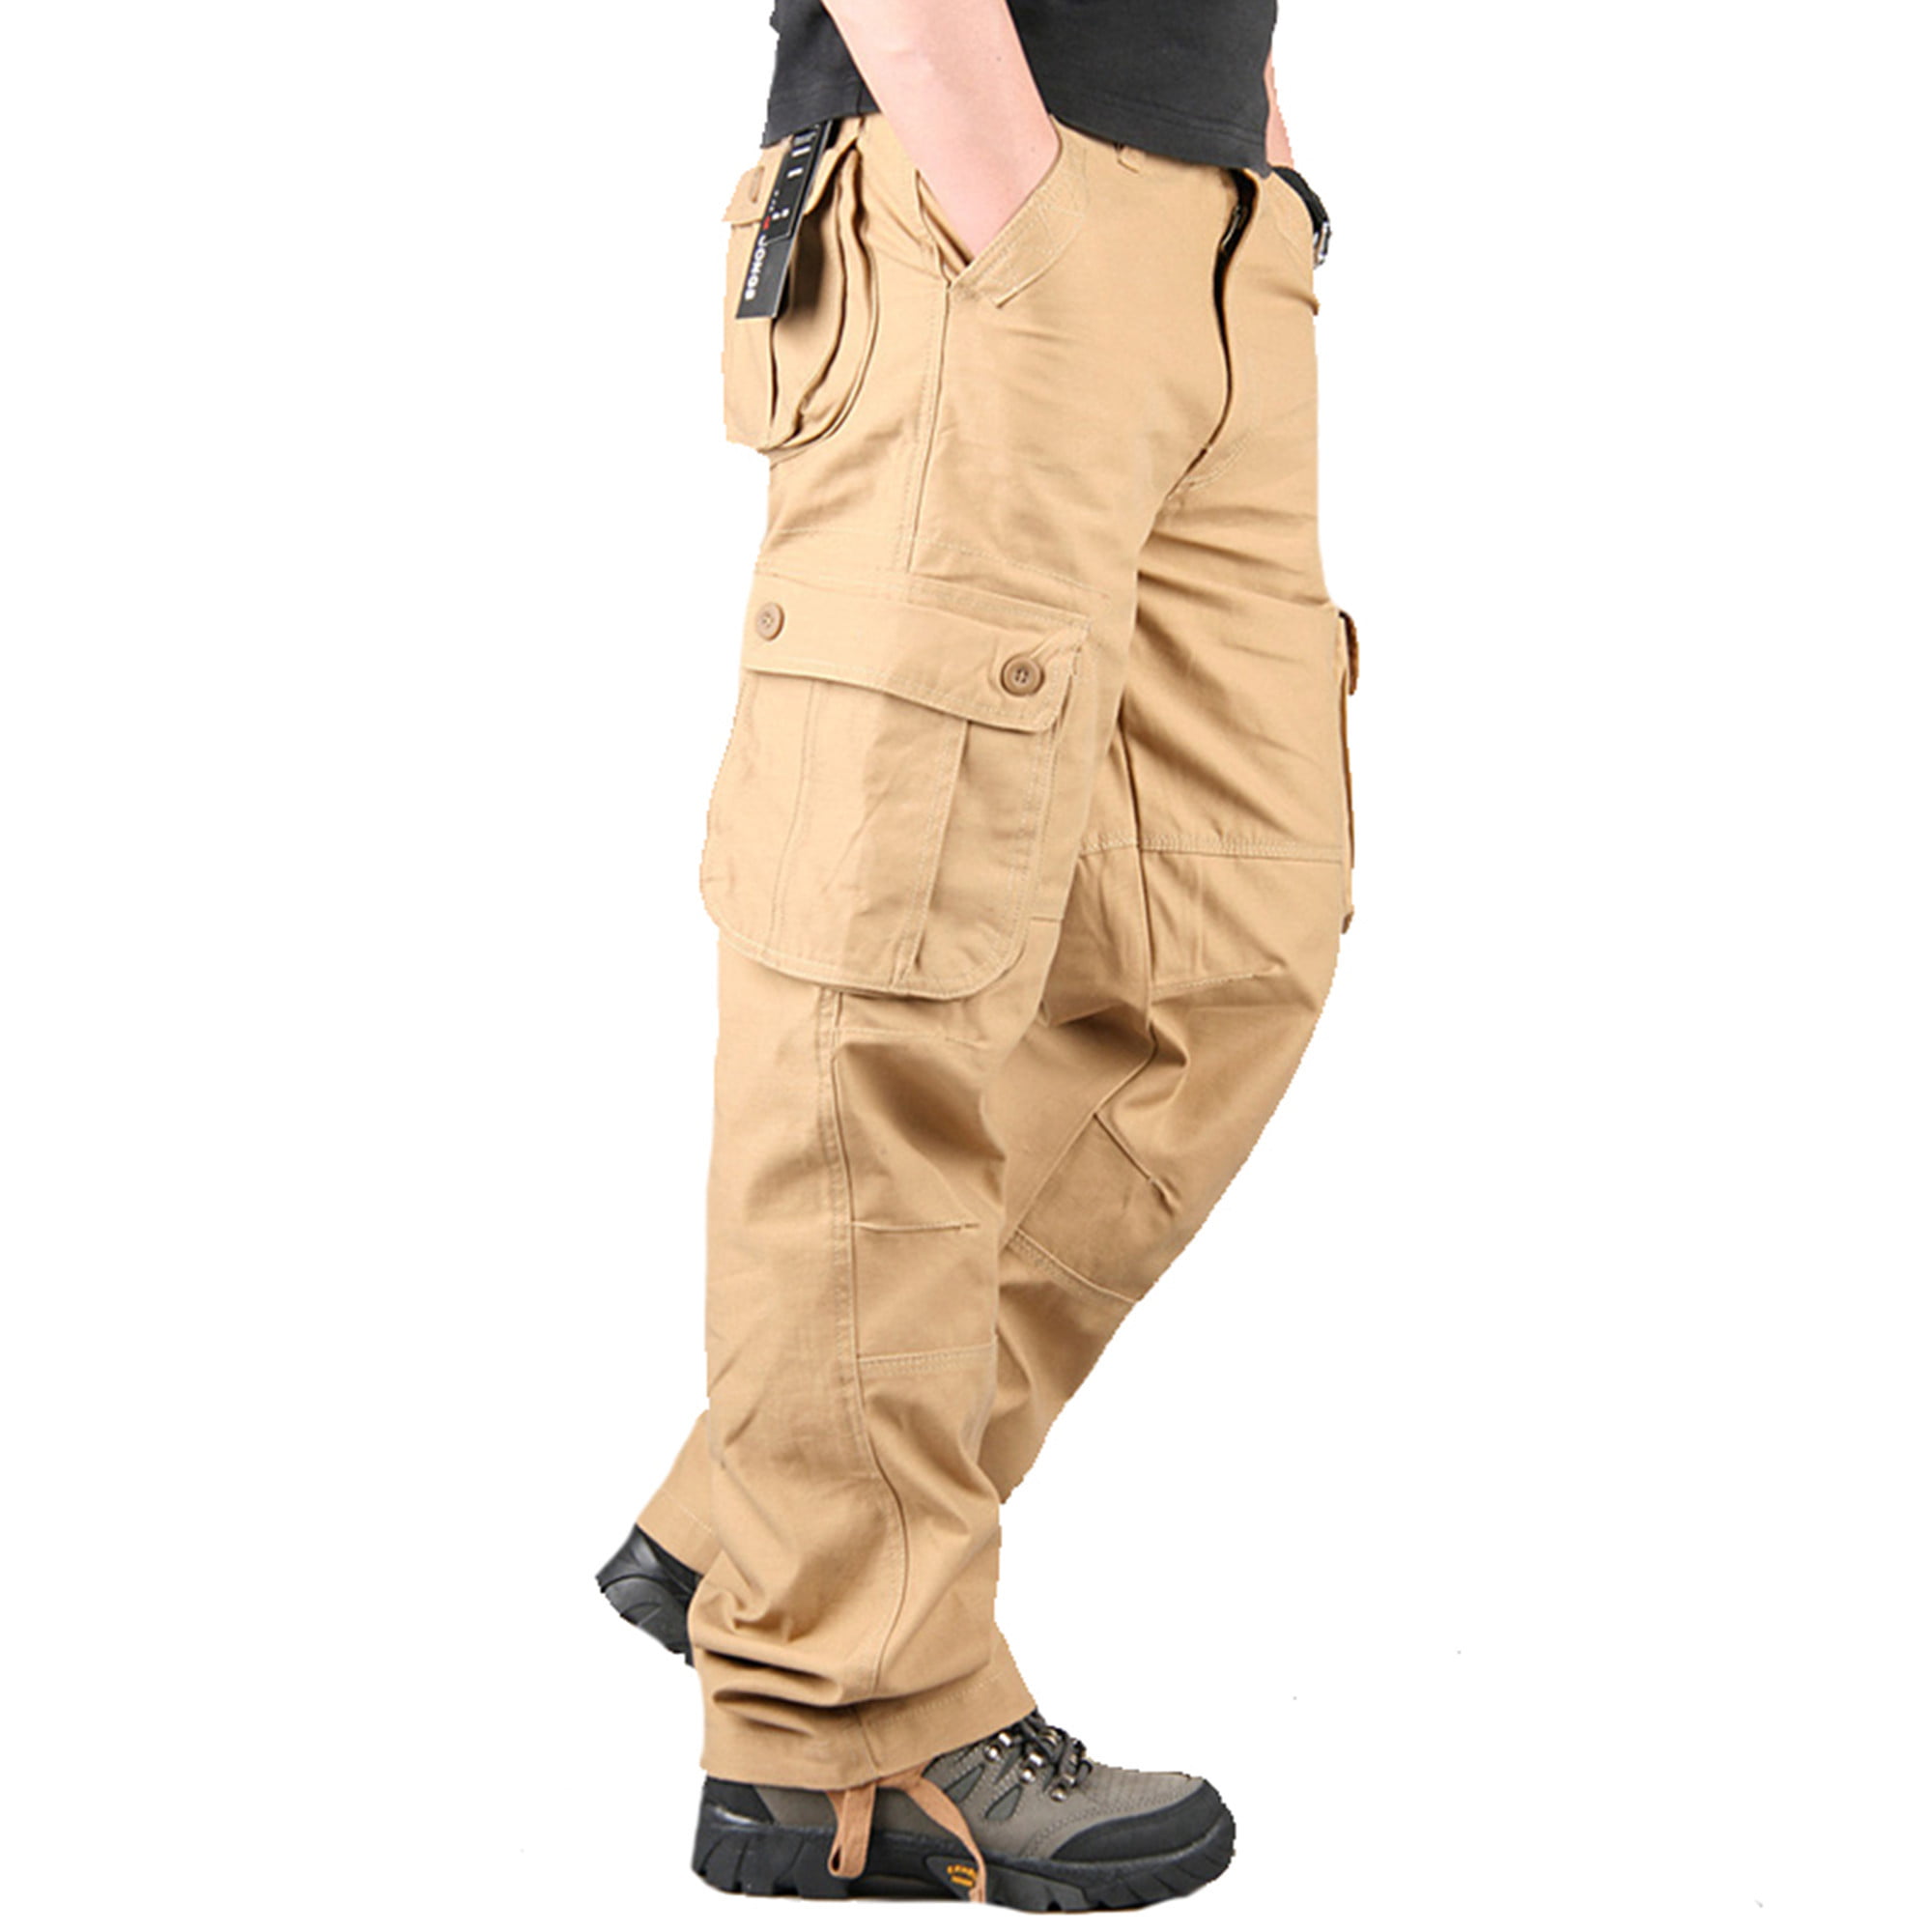 Men's Tactical Cargo Army Work Trousers Combat Outdoor Pocket Pants Plus Size 